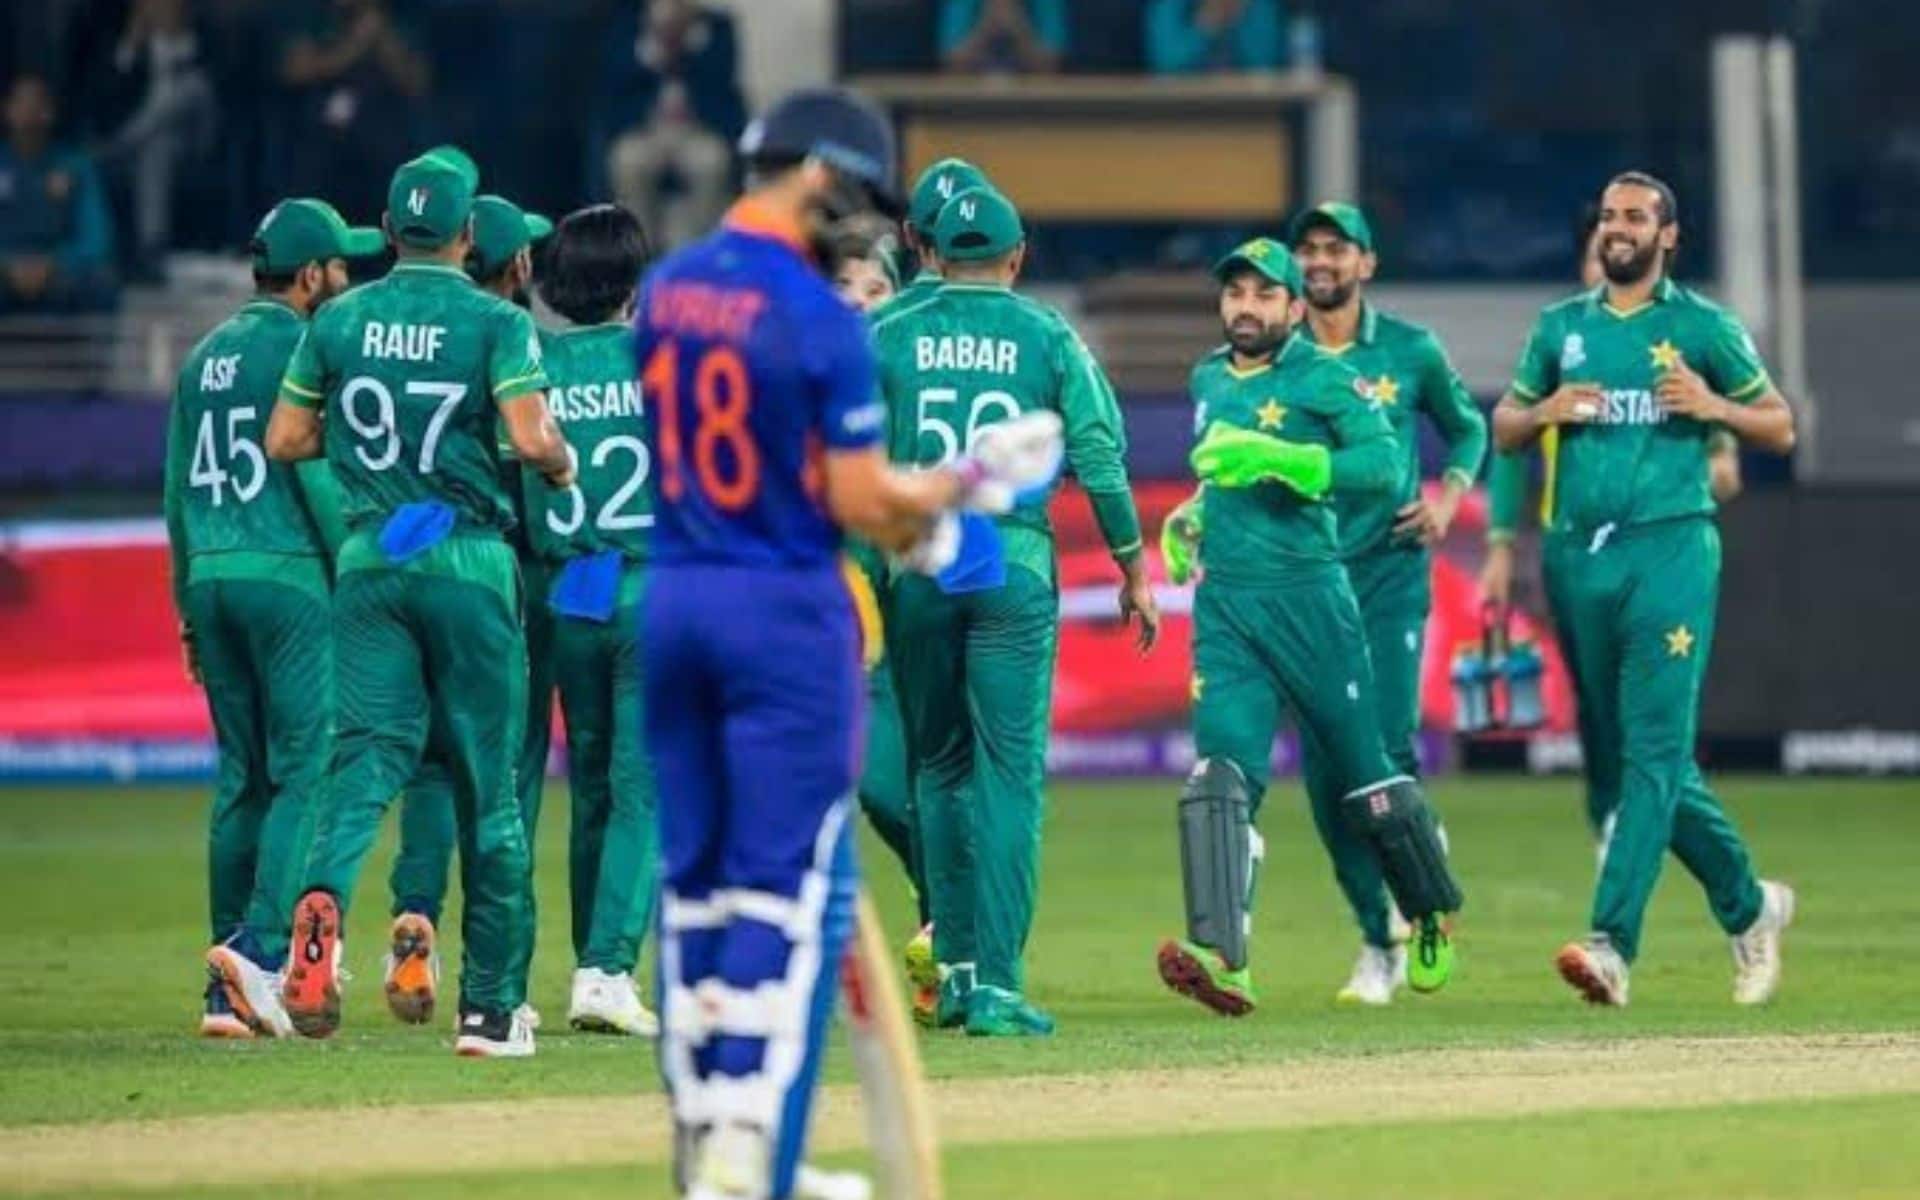 ICC Unlikely To Force India To Travel To Pakistan For Champions Trophy 2025 - Reports